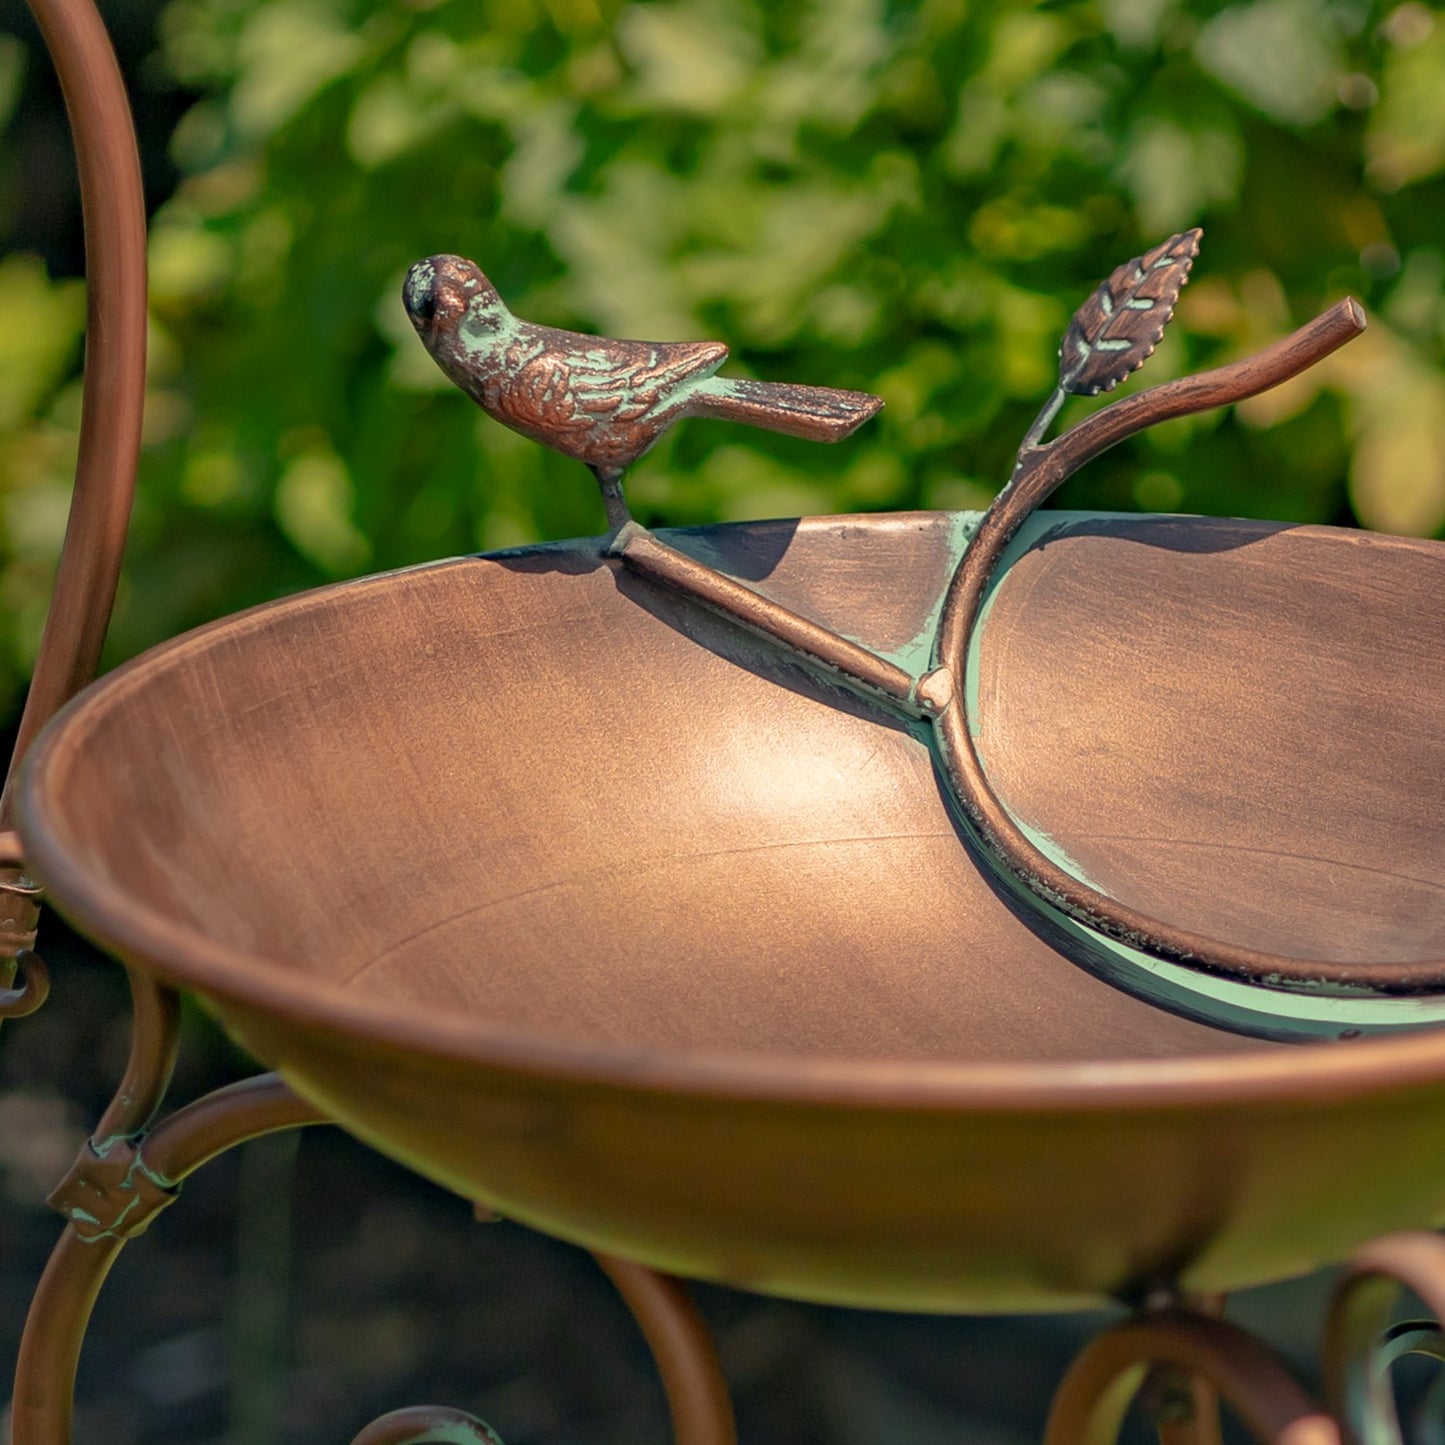 Kateryna Set of 3 Antique Copper Birdbaths with Ornate Stands